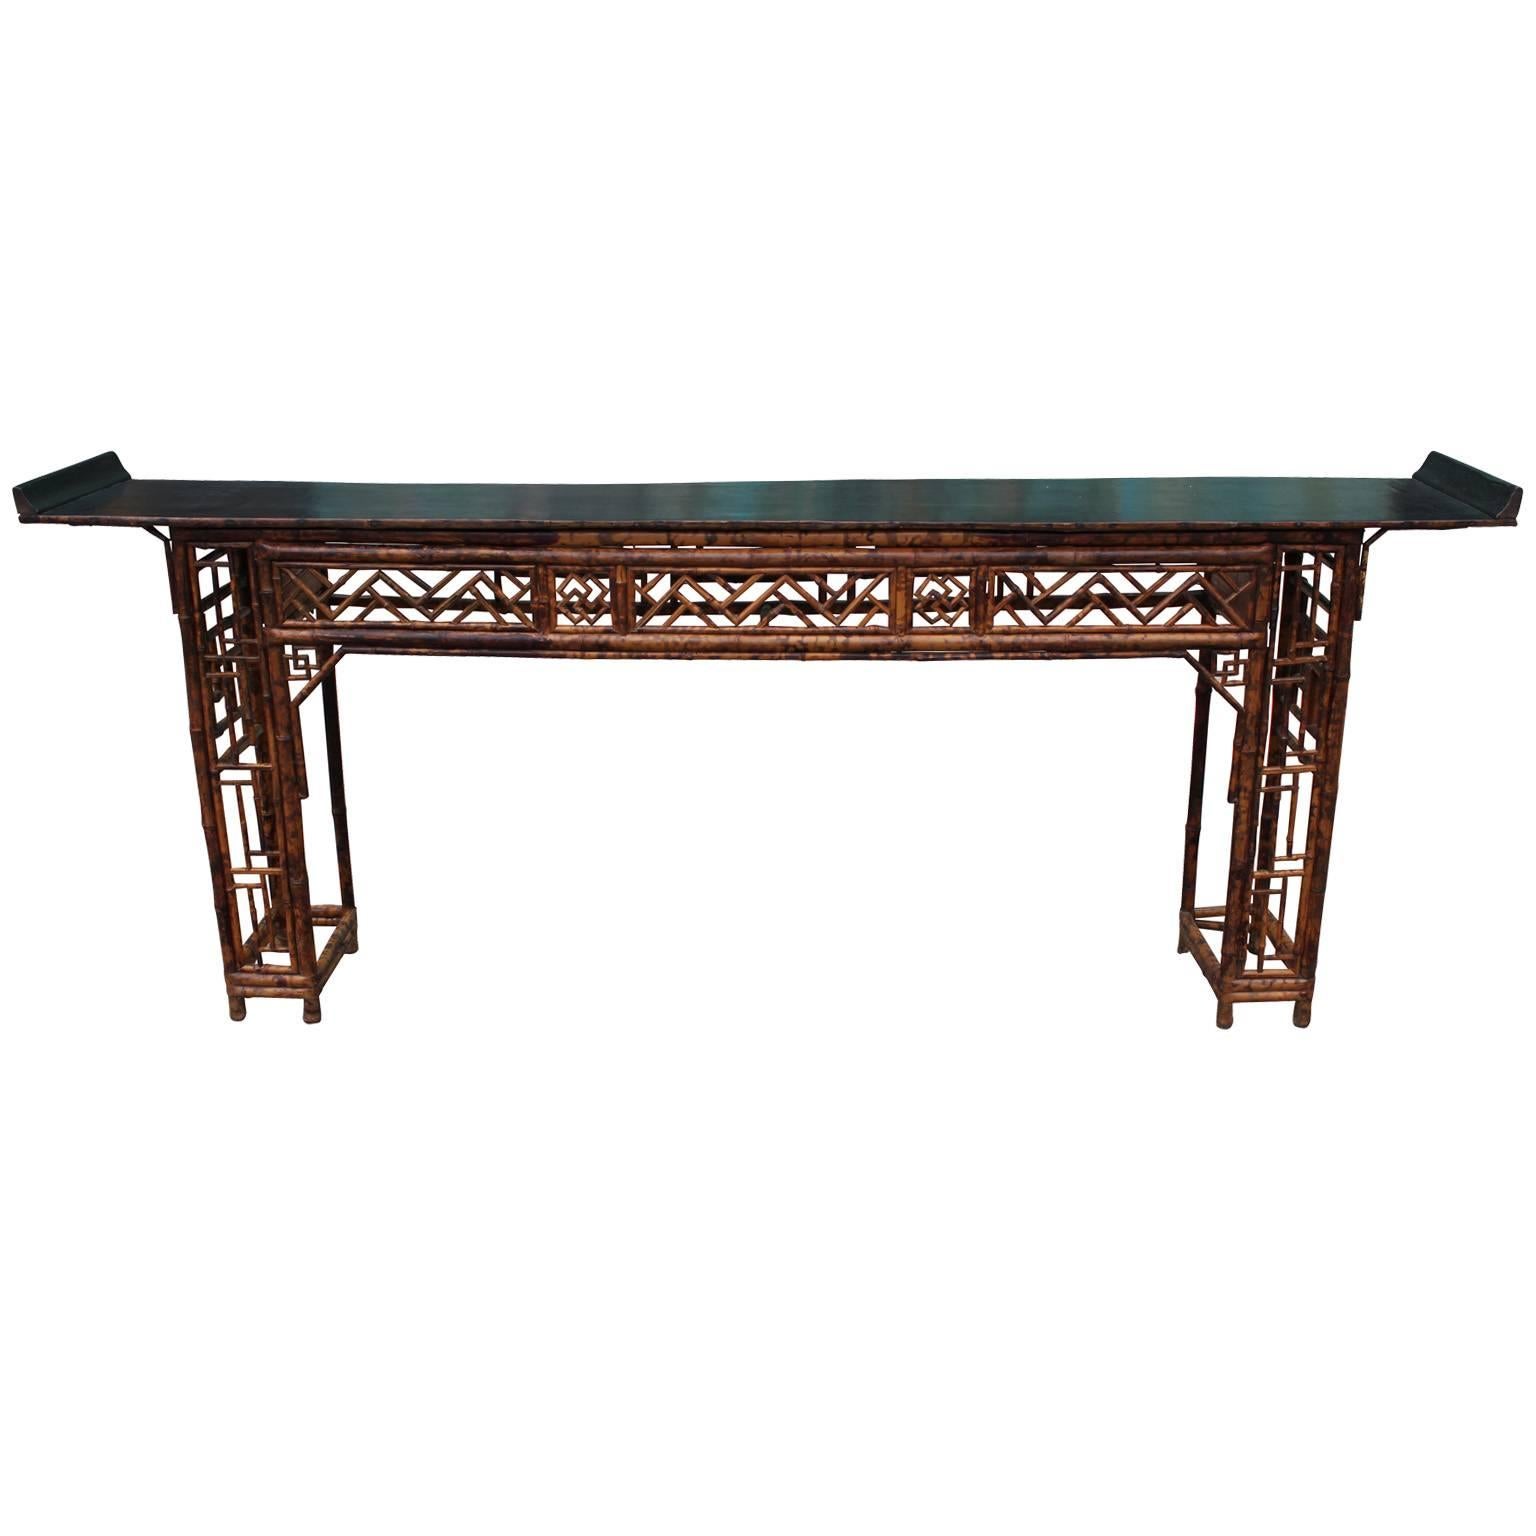 Elegant Chinese bamboo altar table. Base is constructed with an elaborate geometric design, below rectangular inward scrolling black lacquer top. Great as a console table. 